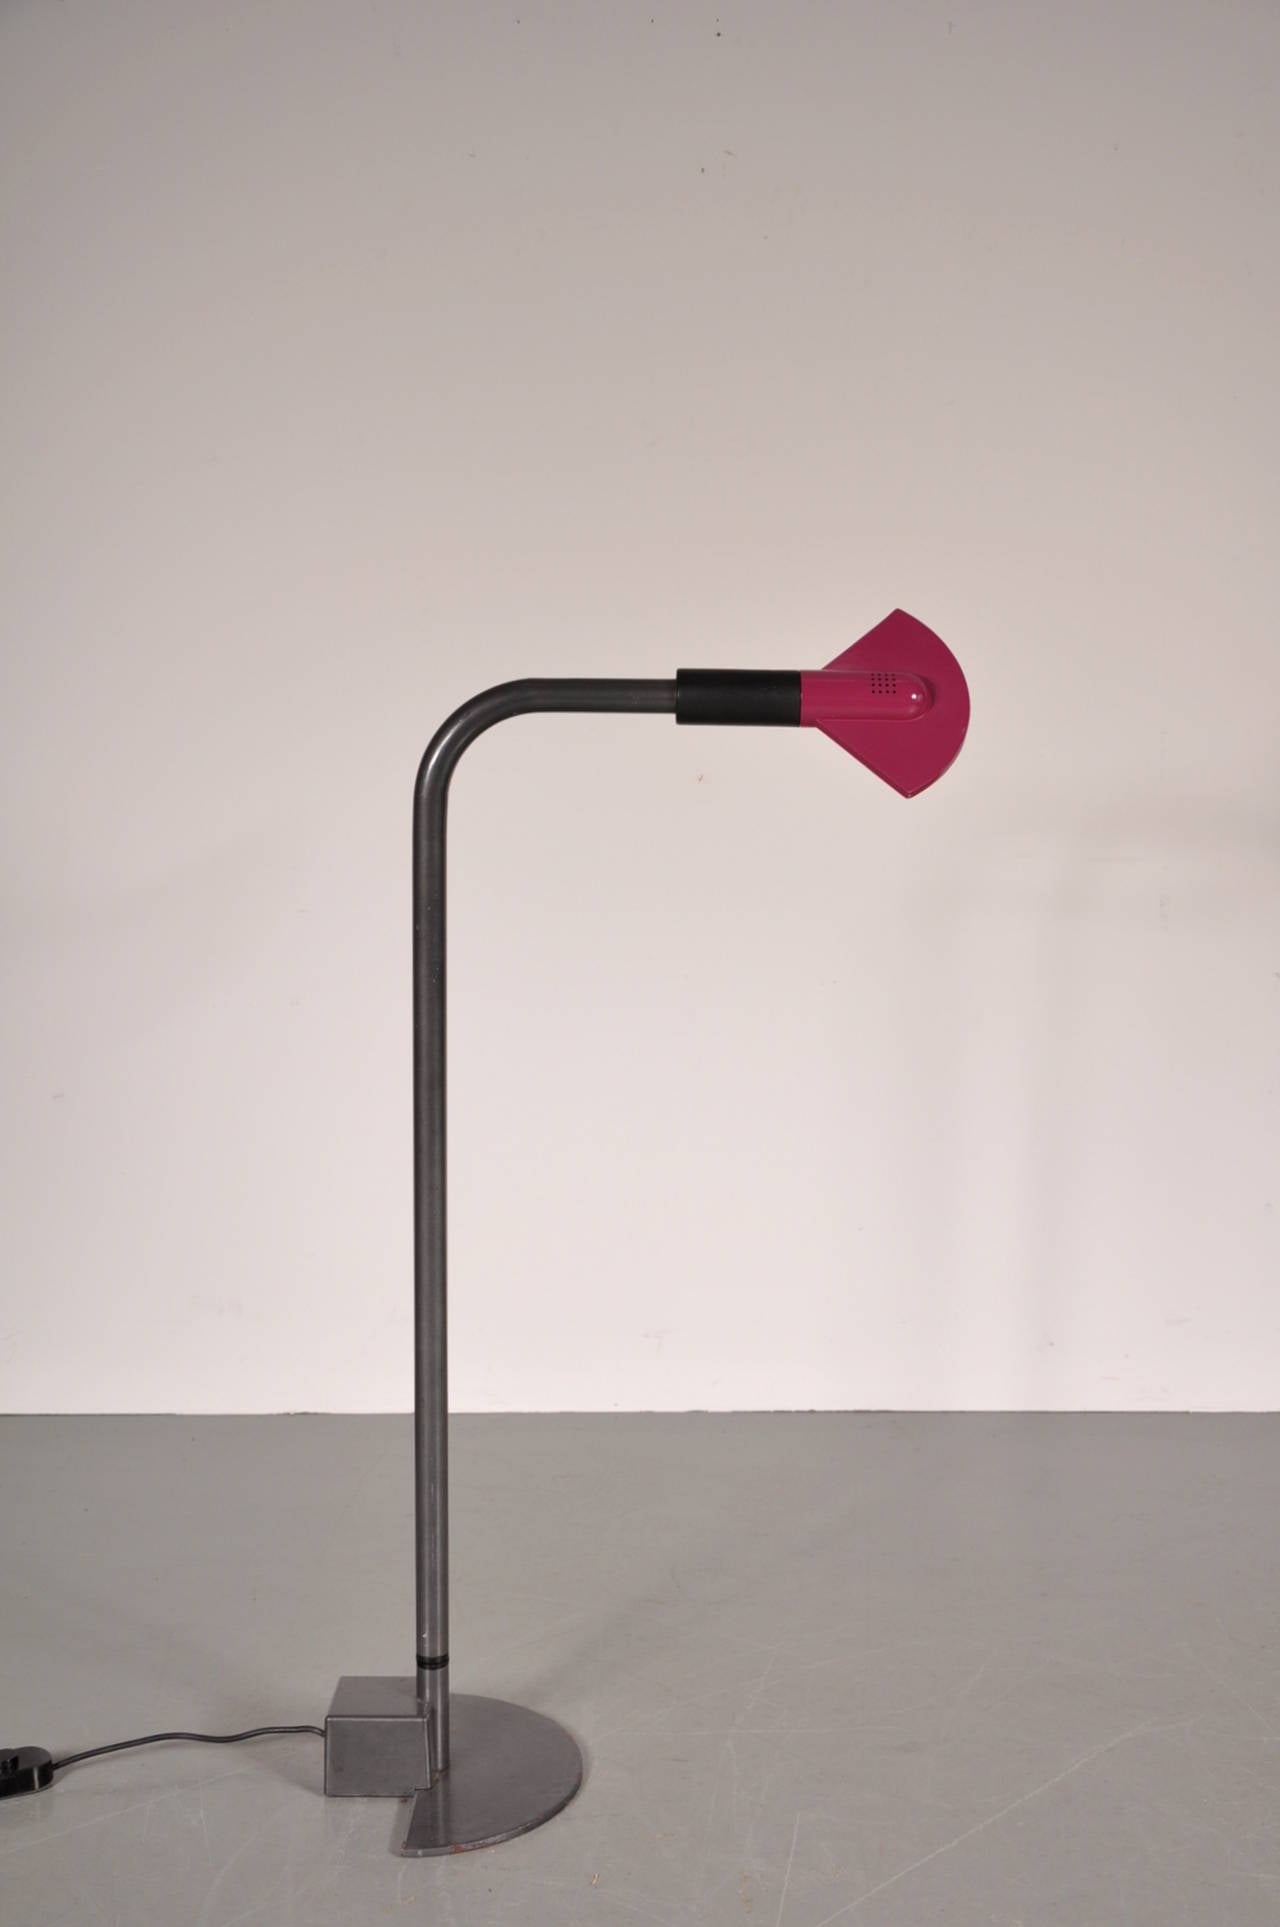 Rare Memphis style adjustable floor lamp by Hans von Klier, manufactured by Bilumen, Italy, circa 1980.

The lamp has a high quality metal base that is easily adjustable in height up to 140 cm. The purple aluminium hood has a unique shape, making